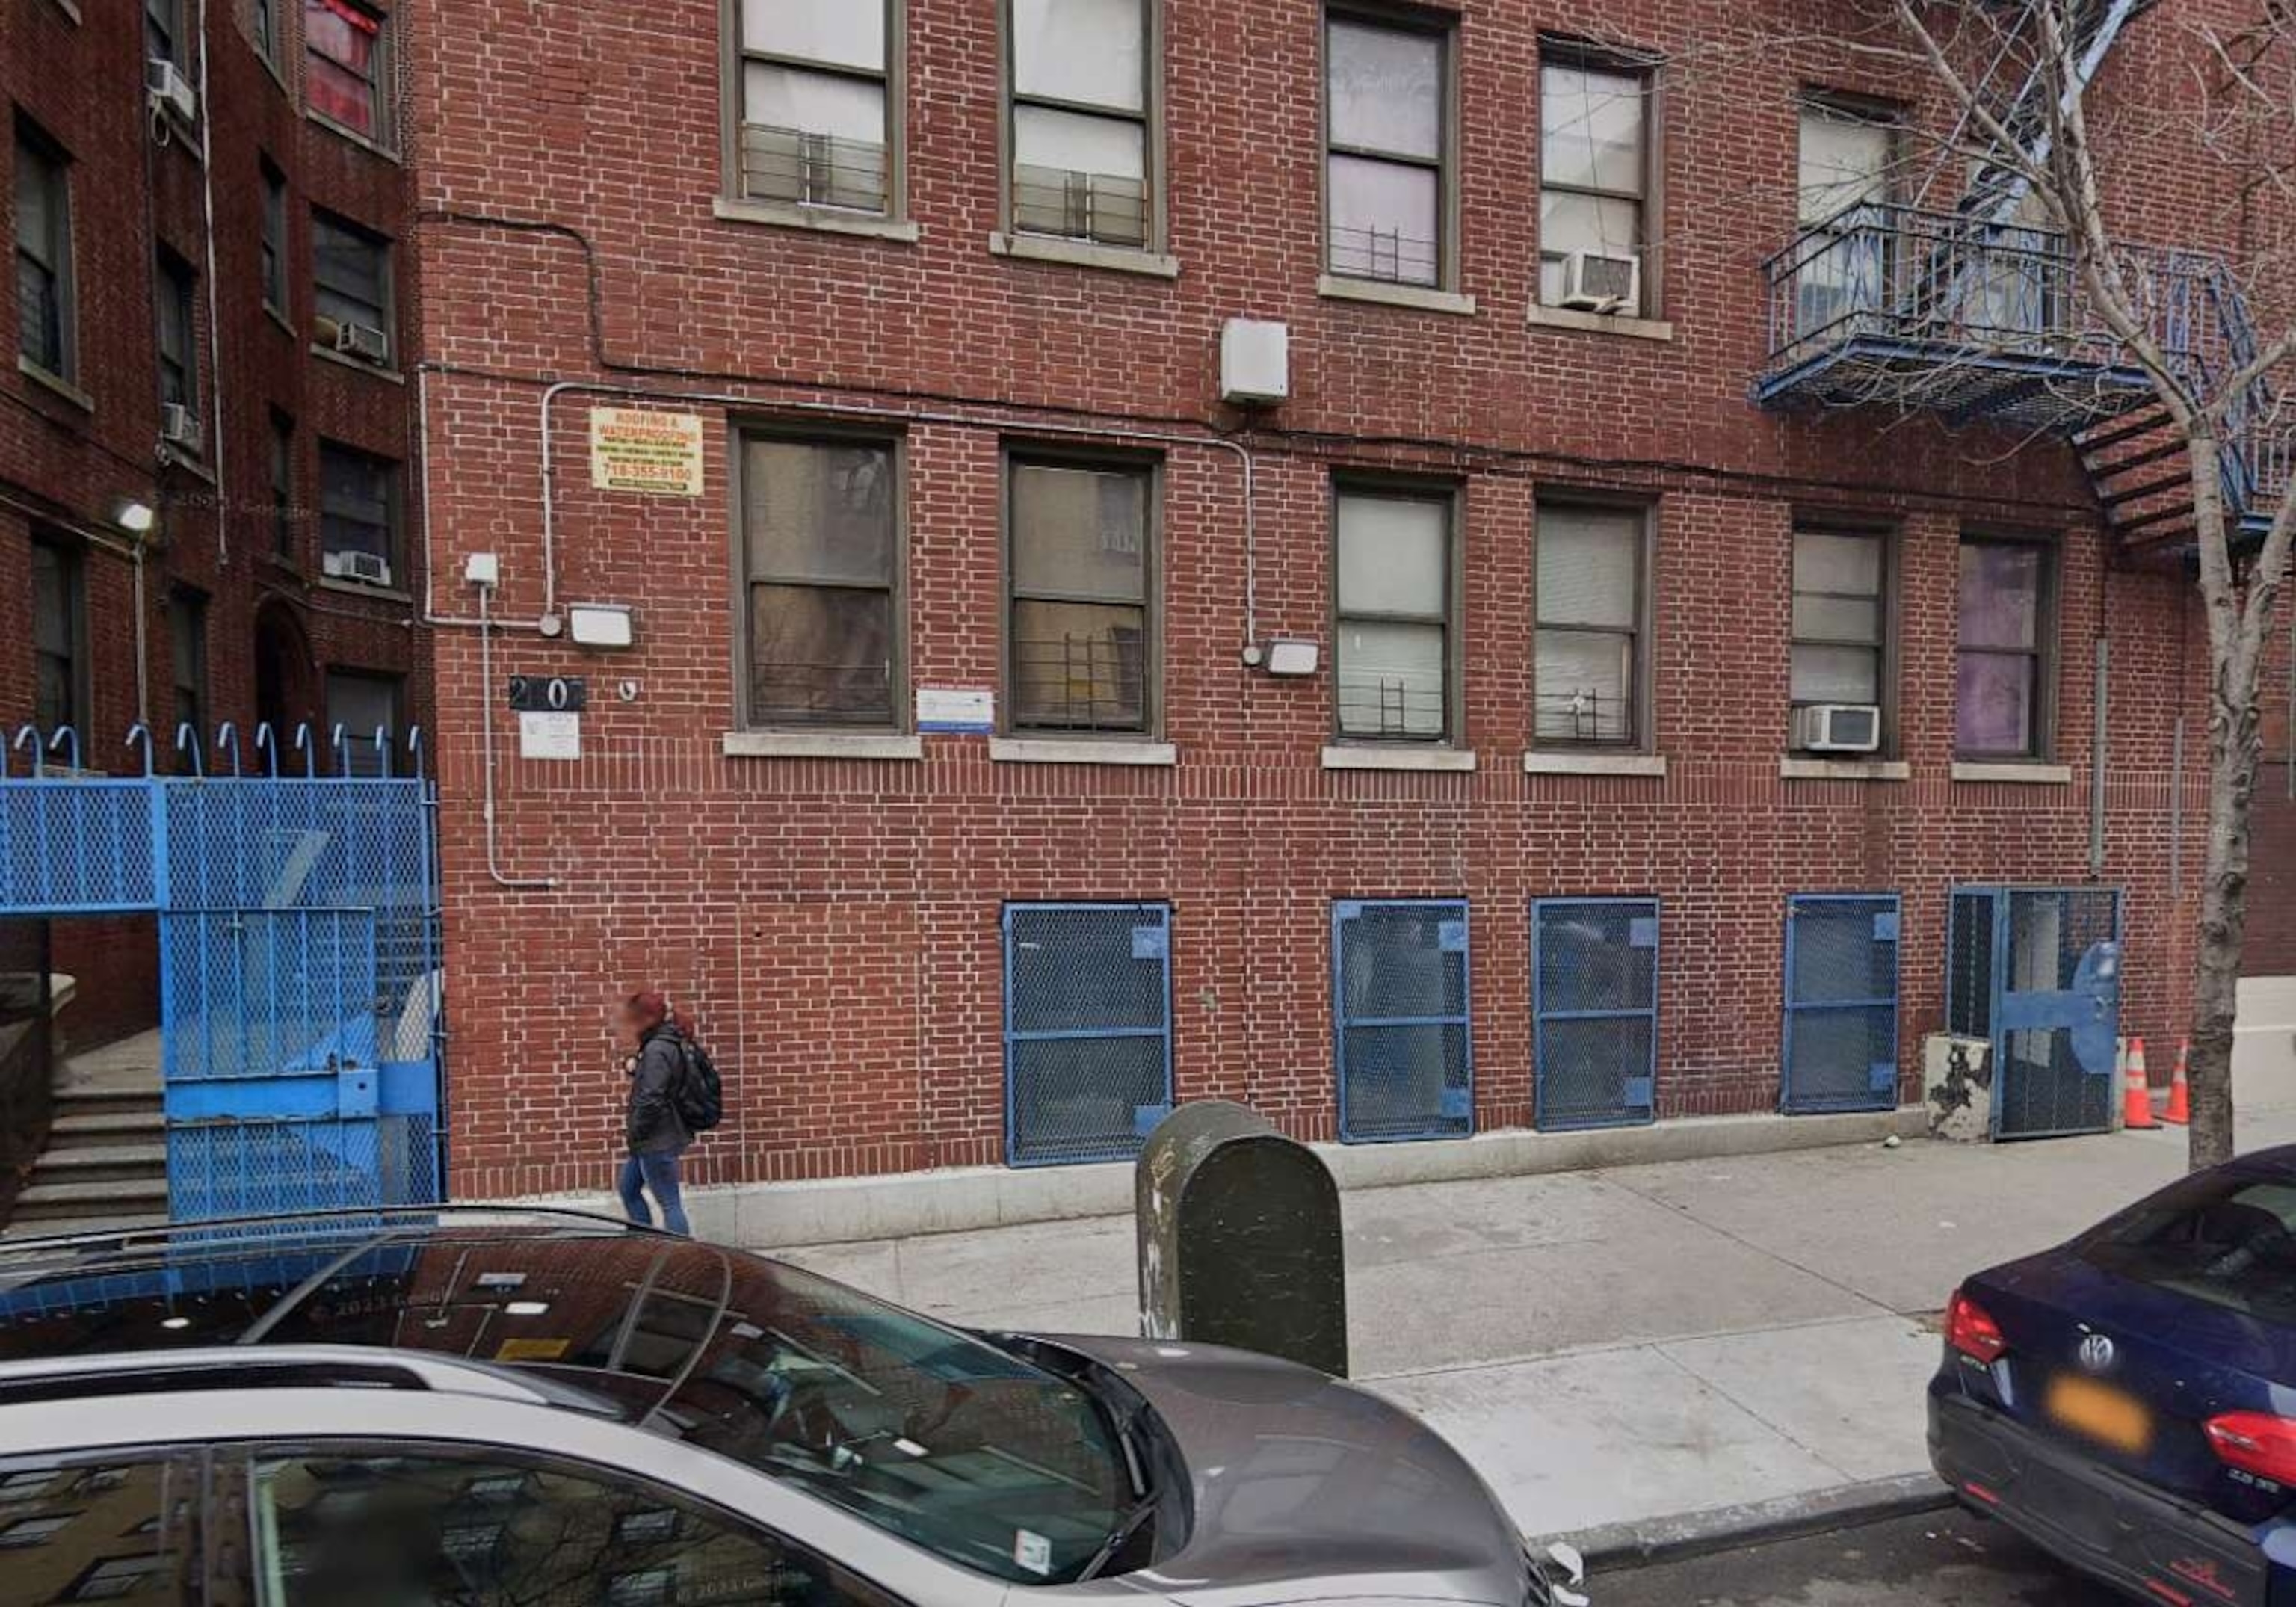 PHOTO: This screen grab from Google Maps shows the building at 2707 Morris Avenue in the Bronx, where the Divino Nino Daycare was located.